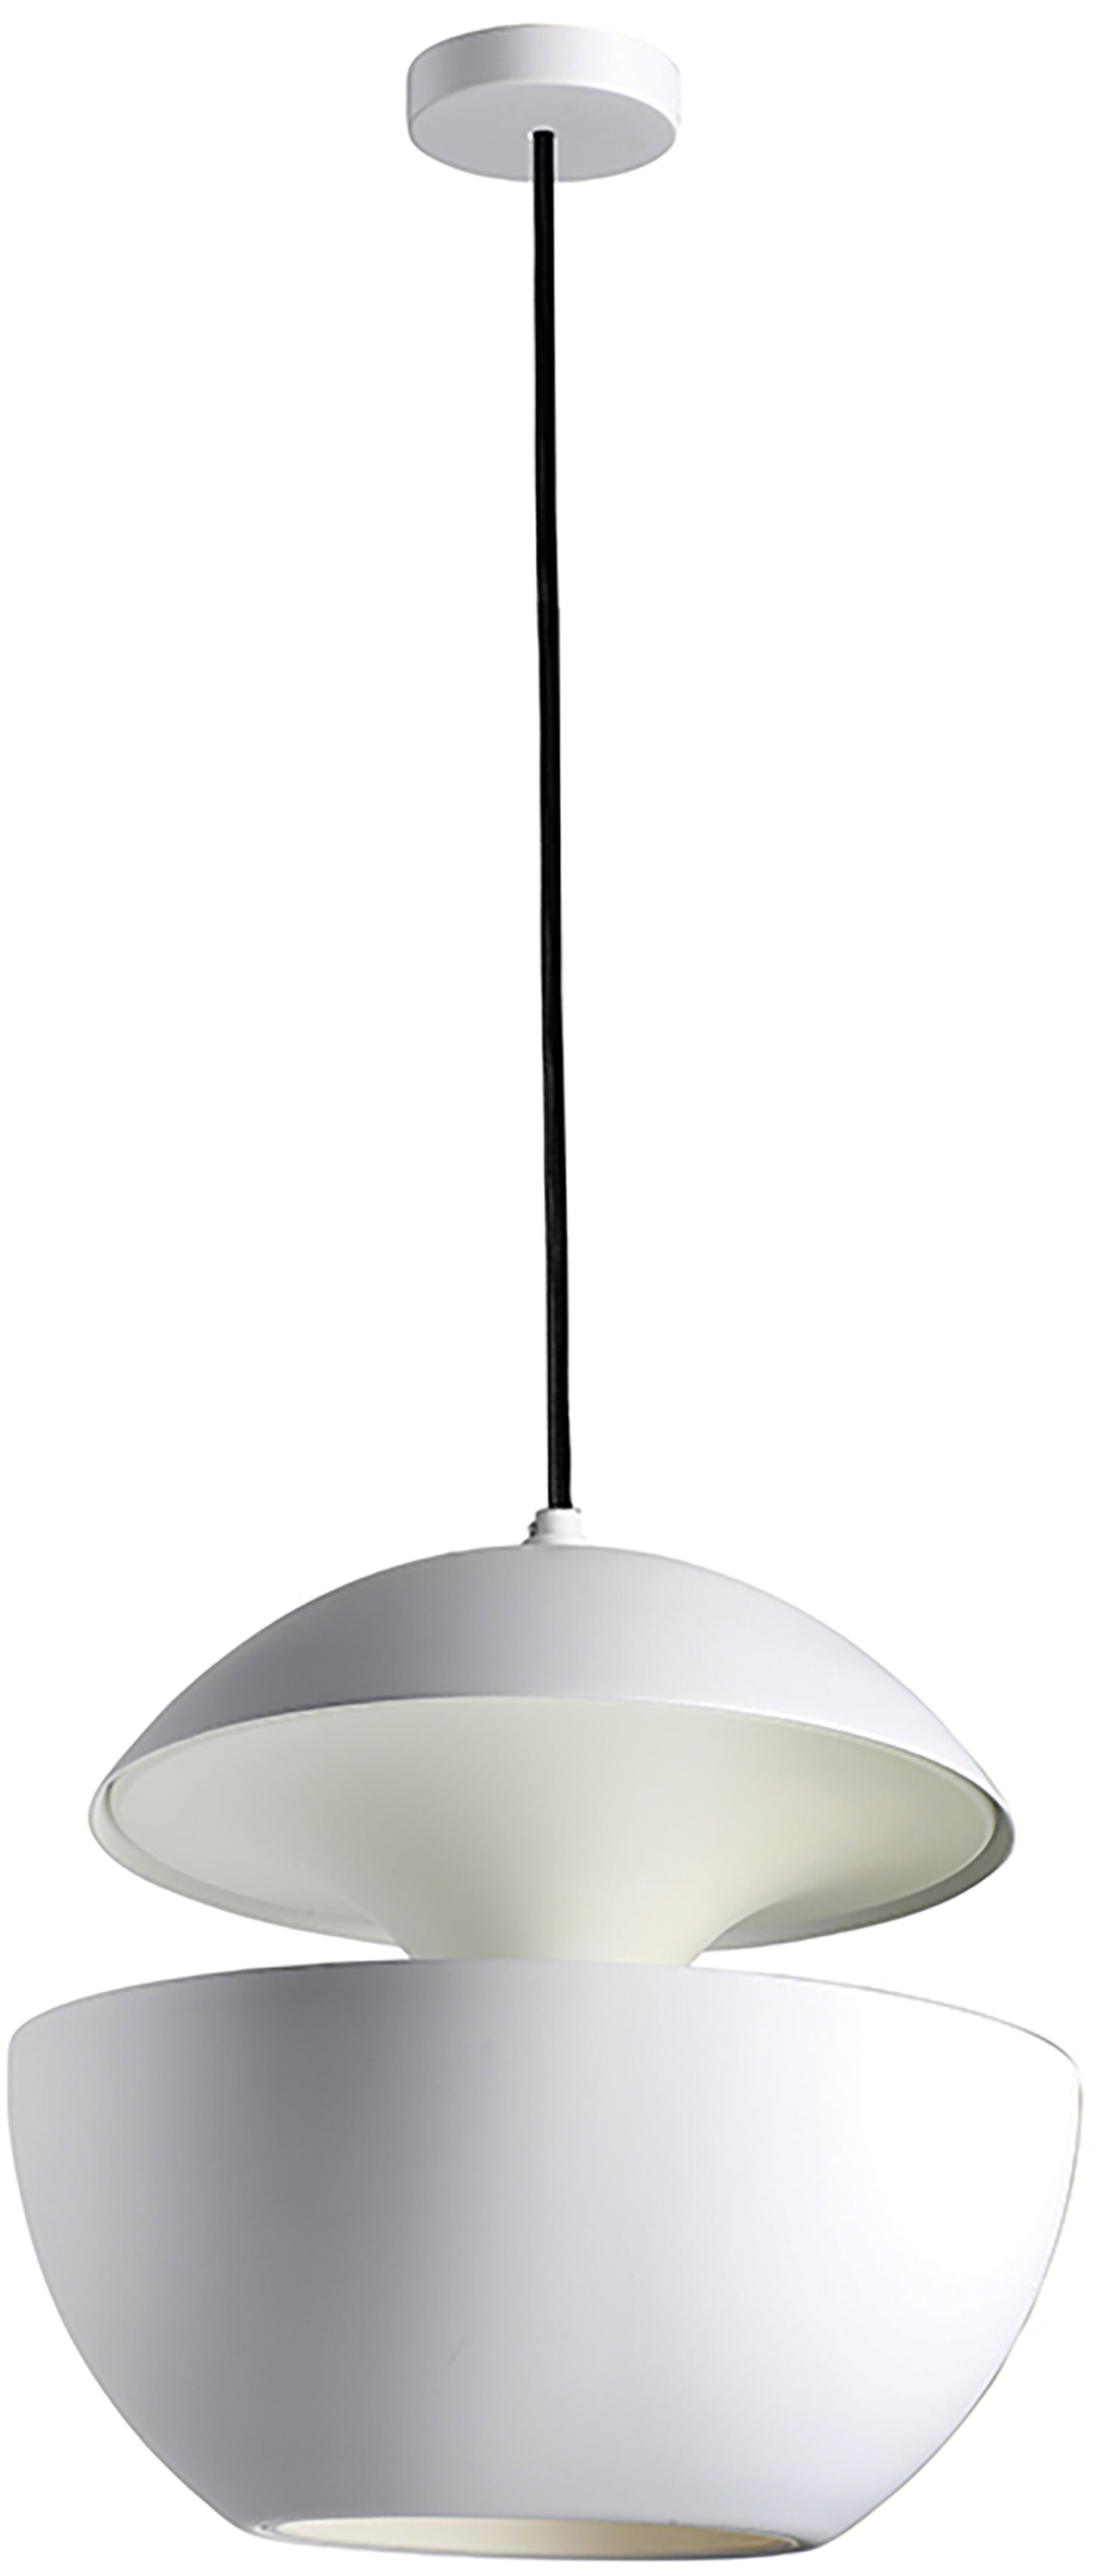 DCW - Lamp - Here Comes The Sun 350 - WH-WH